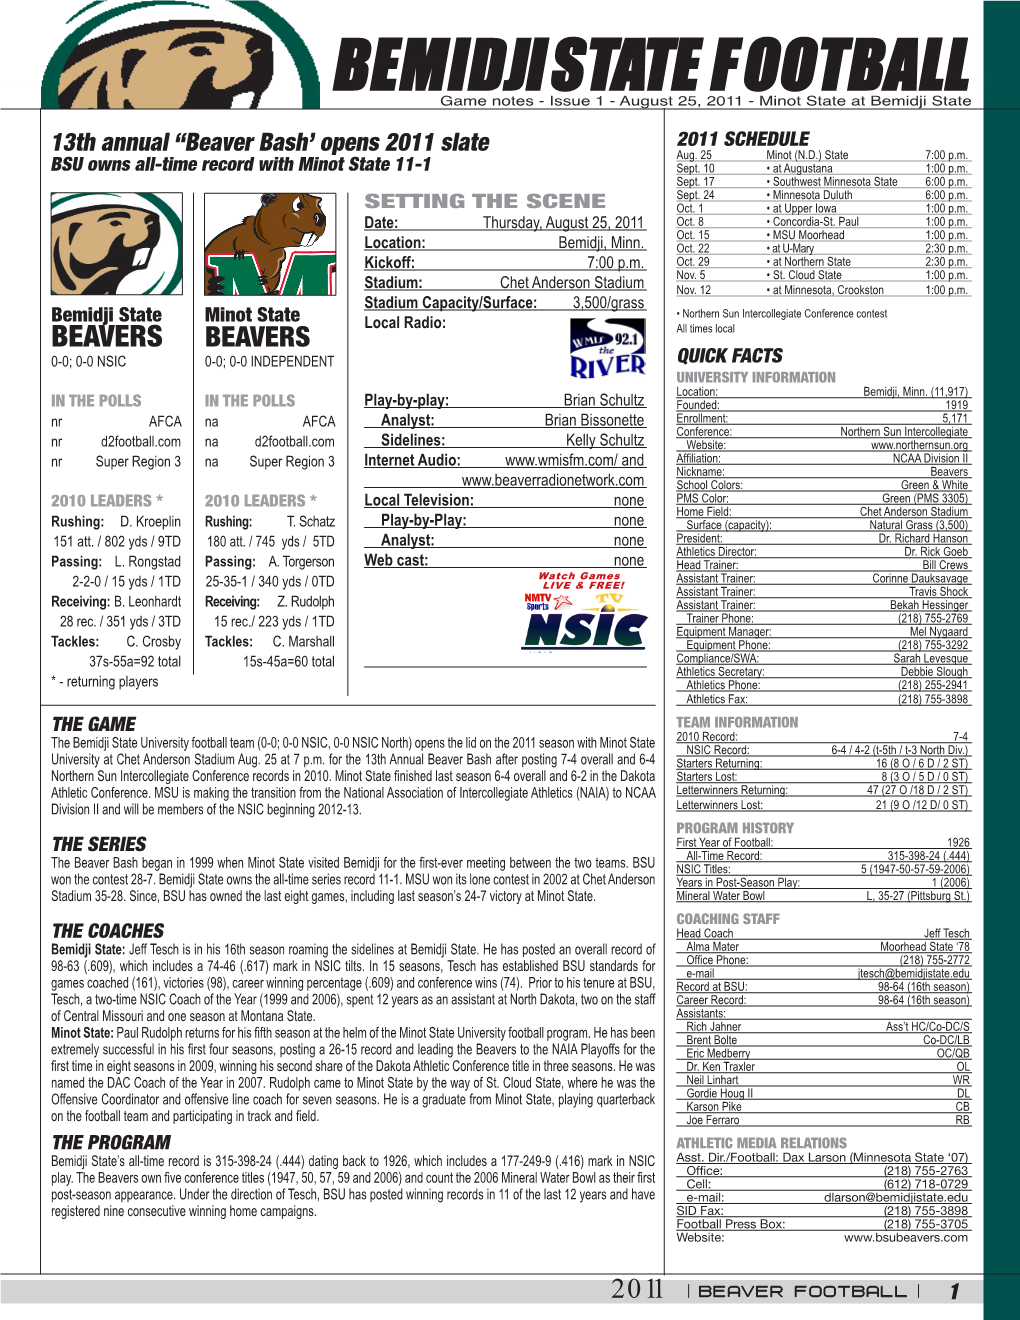 BEMIDJI STATE FOOTBALL Game Notes - Issue 1 - August 25, 2011 - Minot State at Bemidji State 13Th Annual “Beaver Bash’ Opens 2011 Slate 2011 SCHEDULE Aug